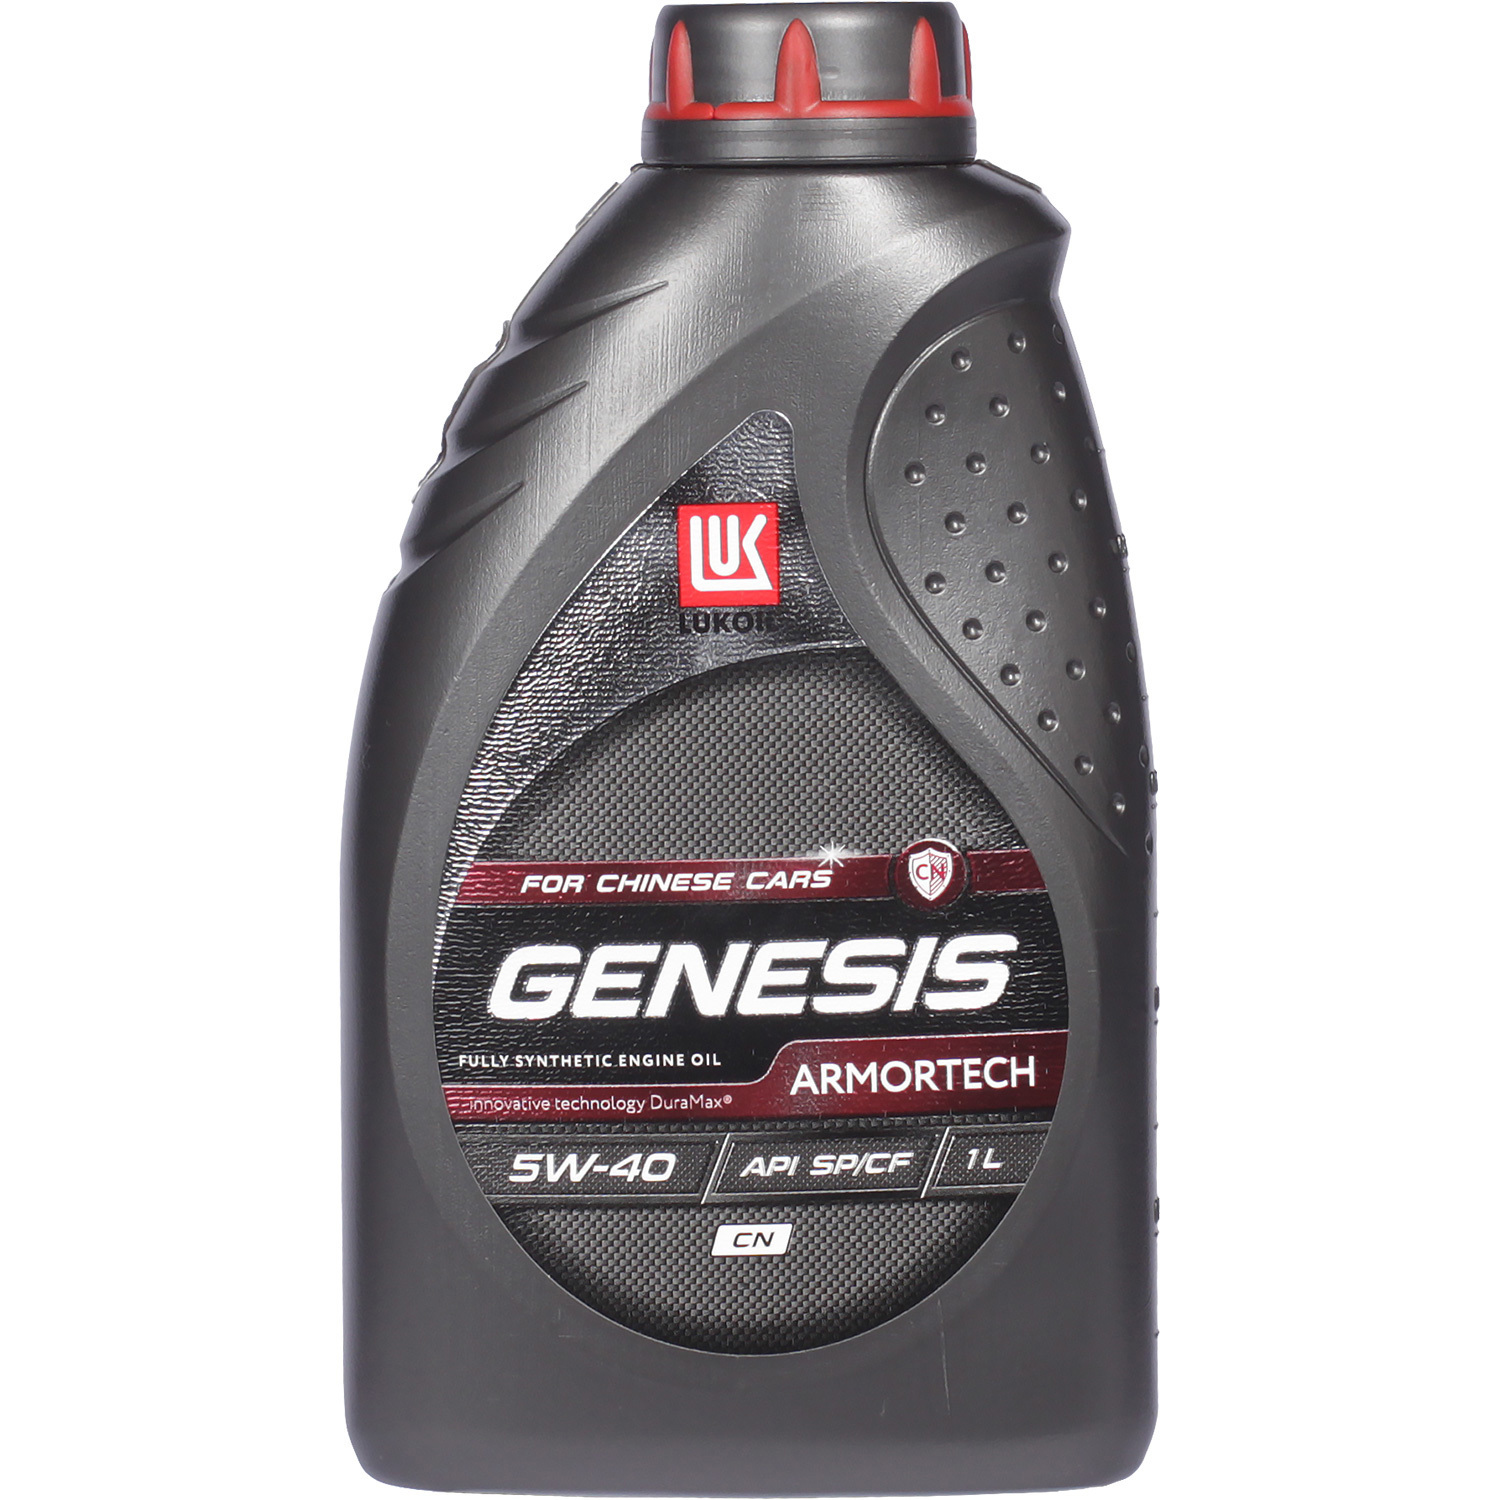 Lukoil Моторное масло Lukoil Genesis Armortech CN (for Chinese cars) 5W-40, 1 л